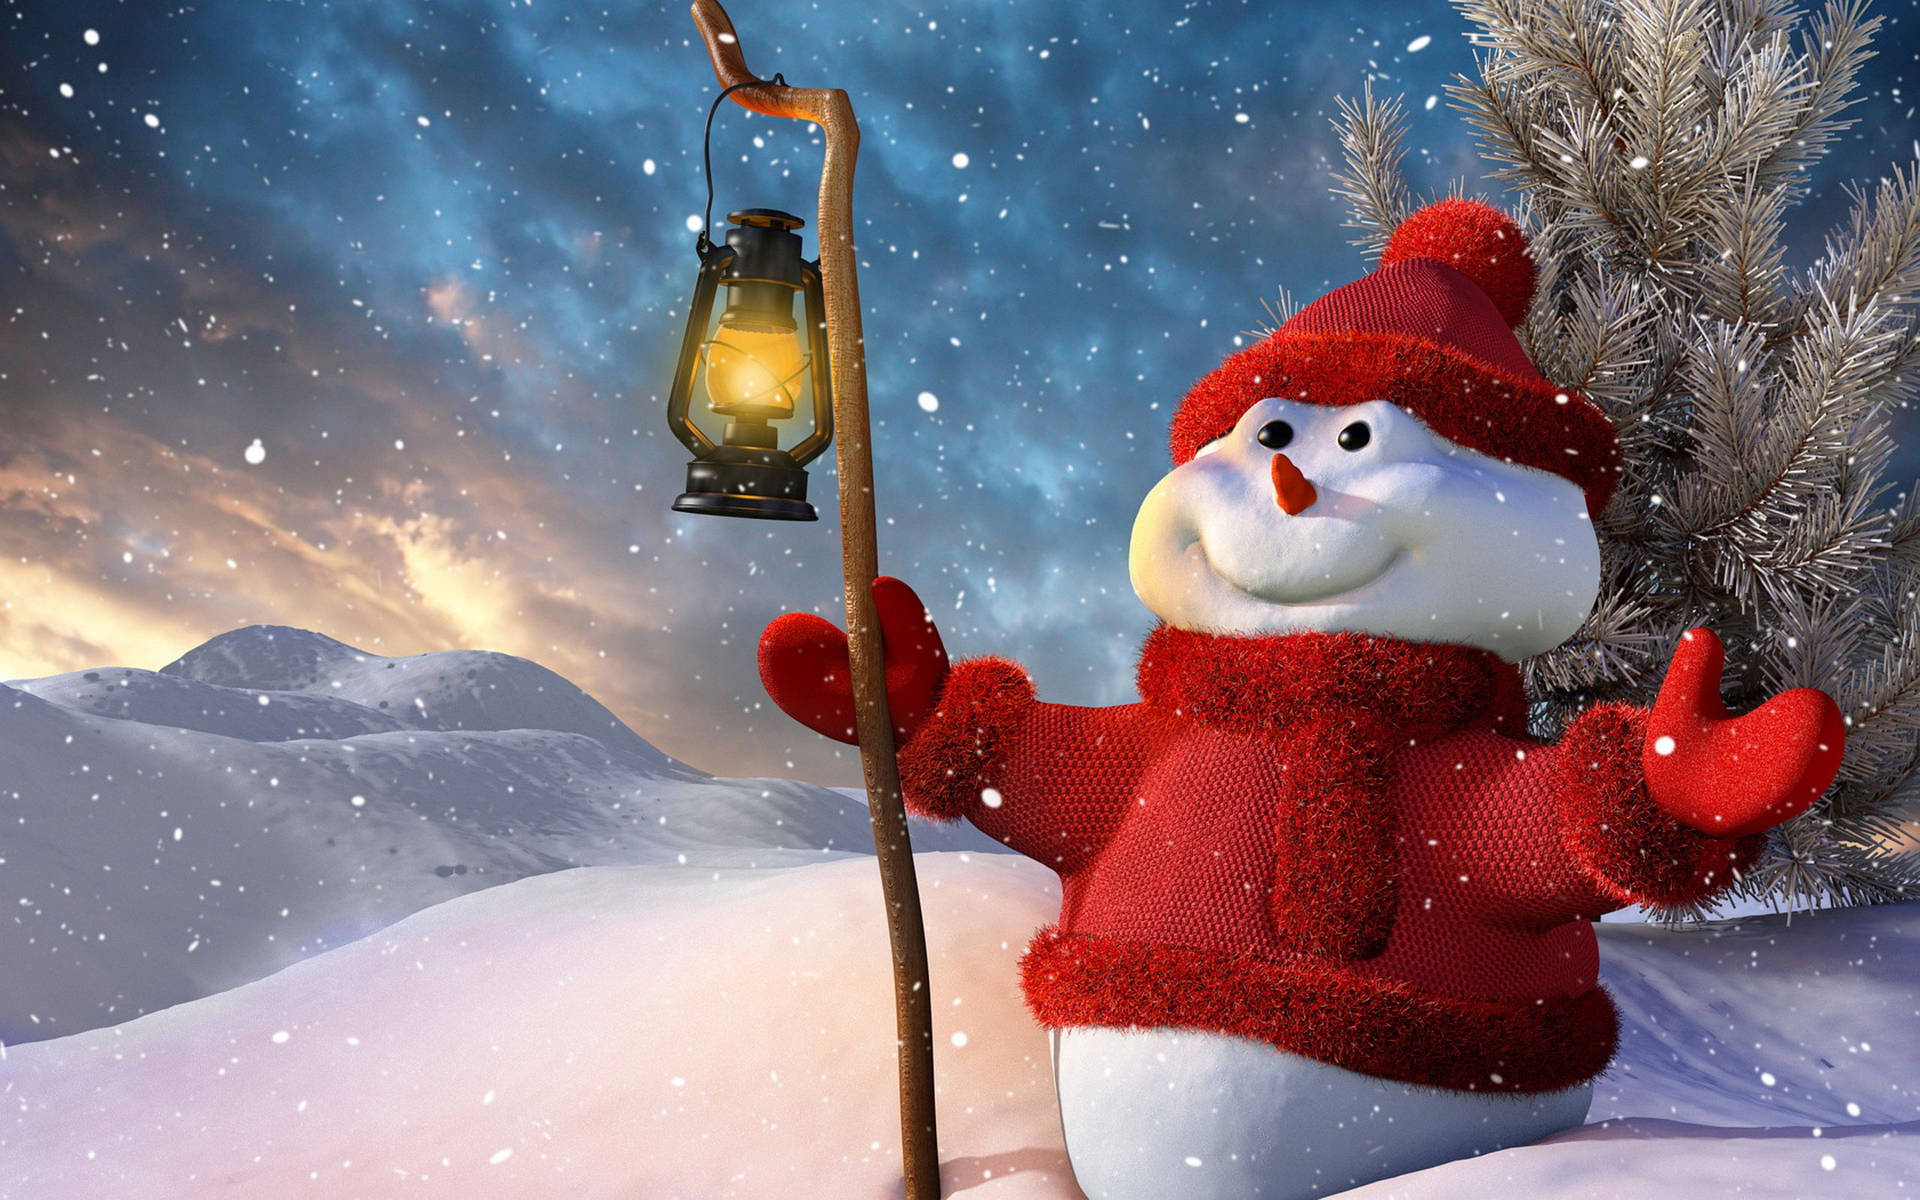 Snowman 2560X1600 Wallpaper and Background Image